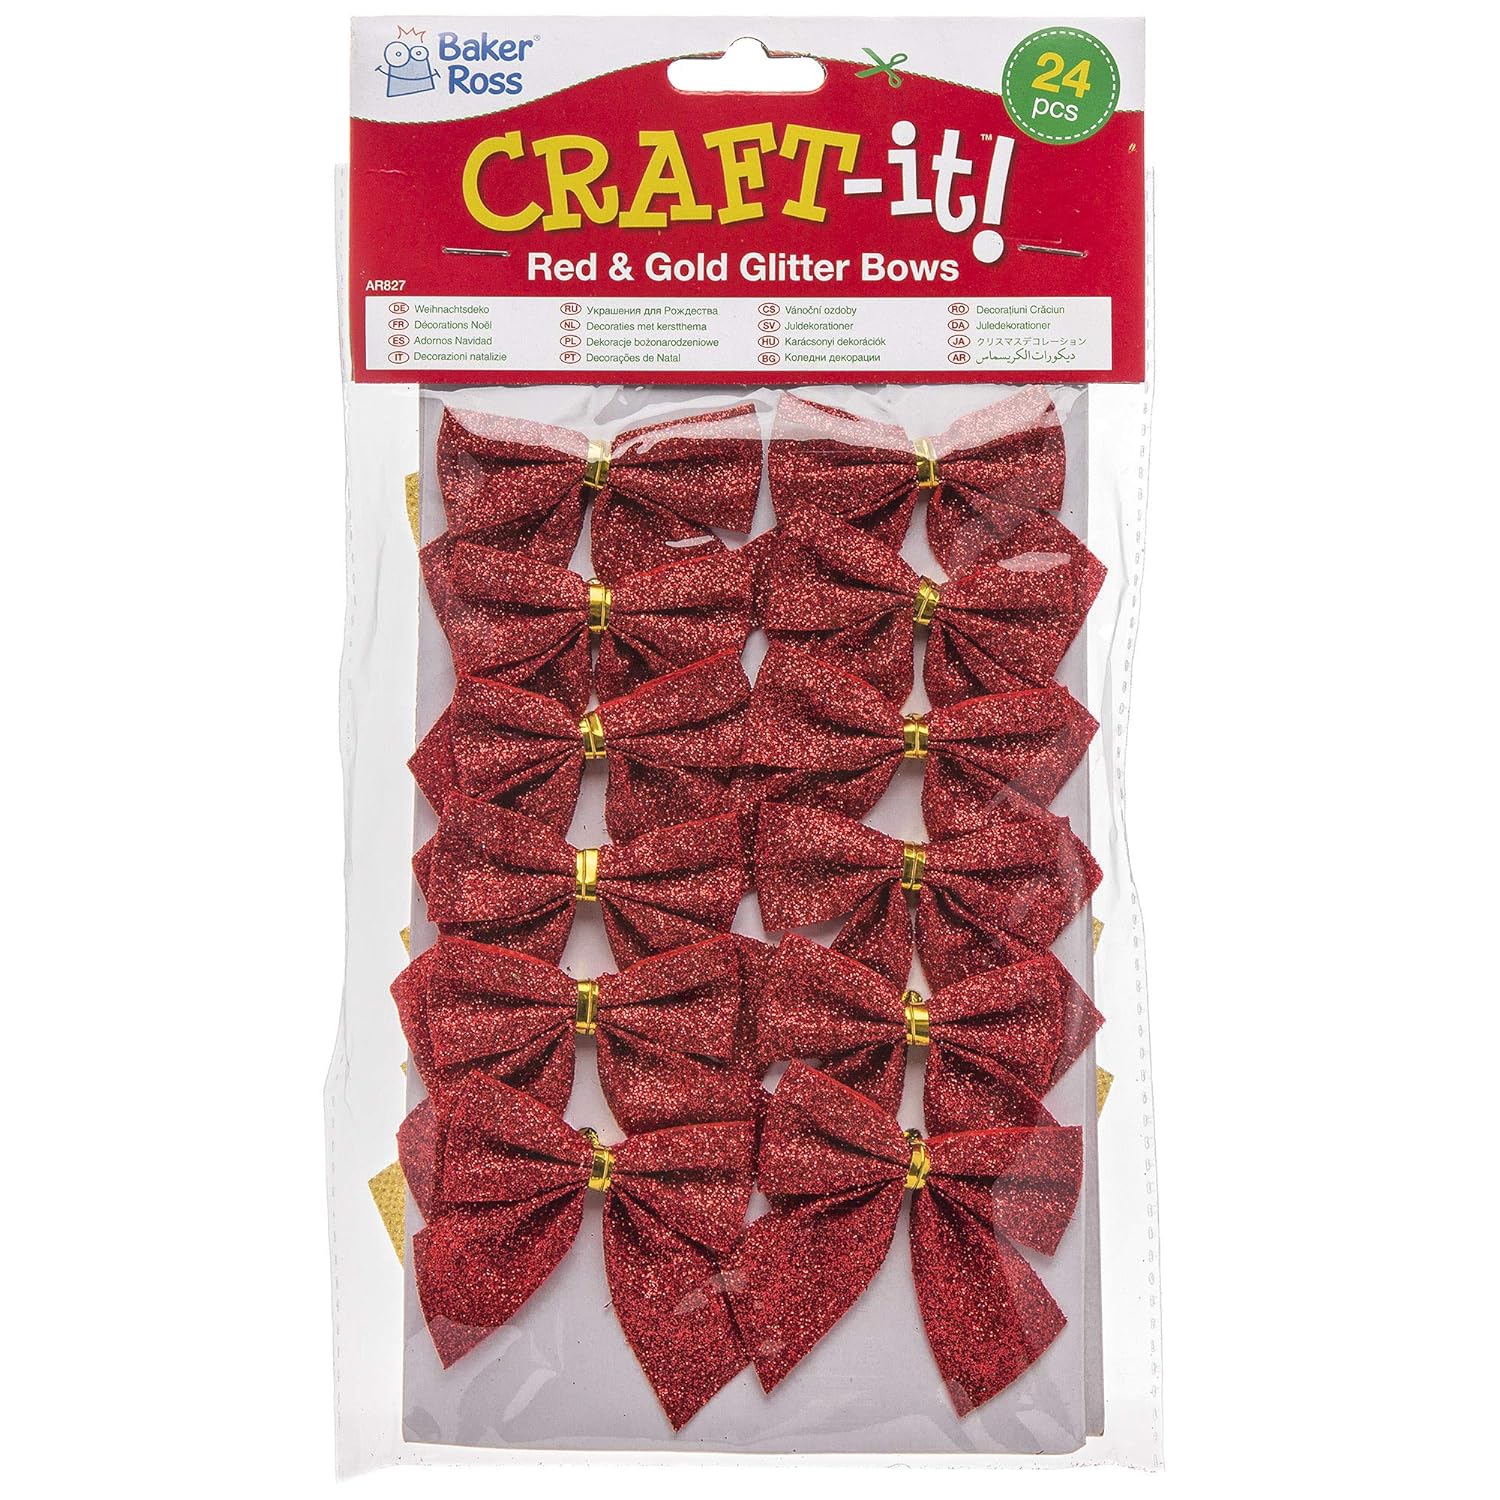 Red & Gold Glitter Bows (Pack of 24) Craft Supplies